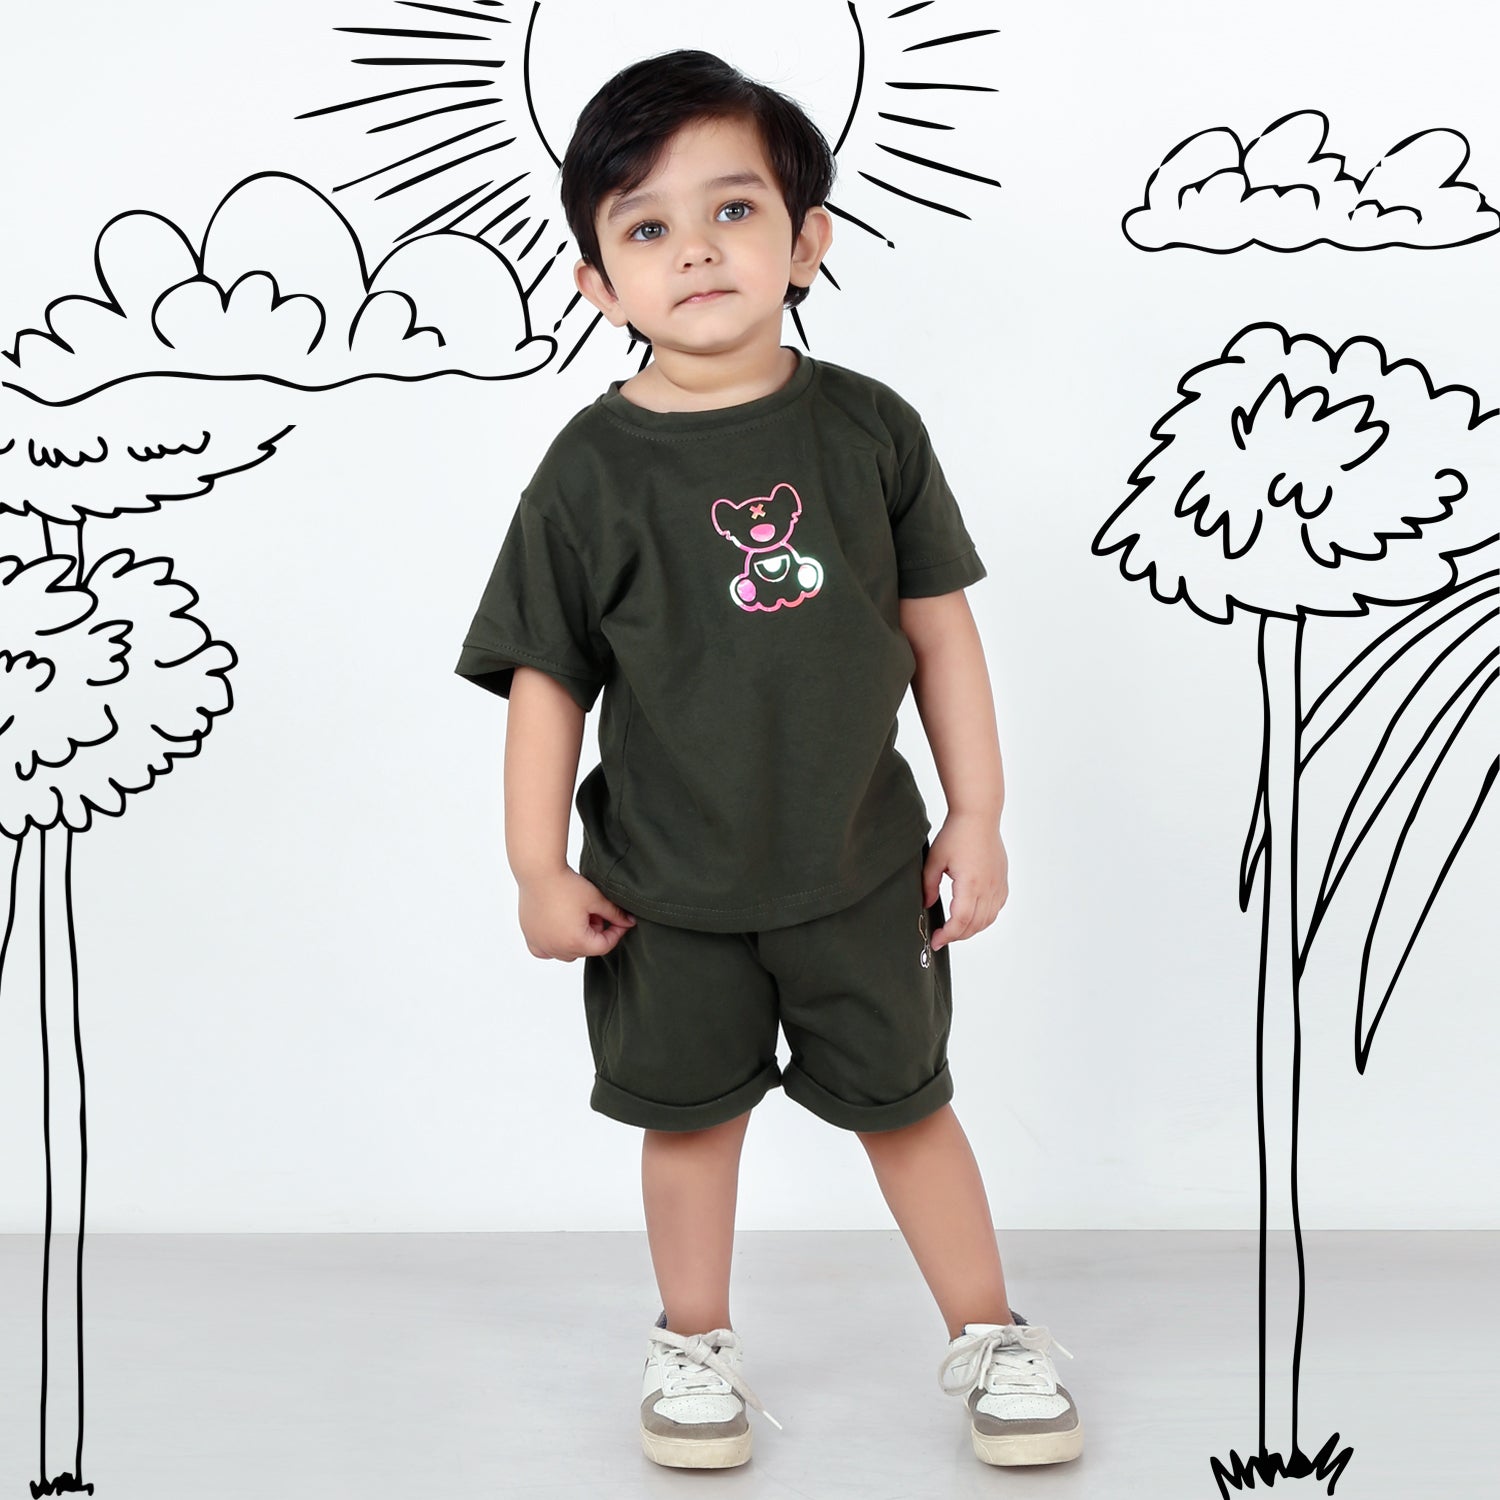 Cuddle Up in Style with our Teddy Bear T-Shirt Set!